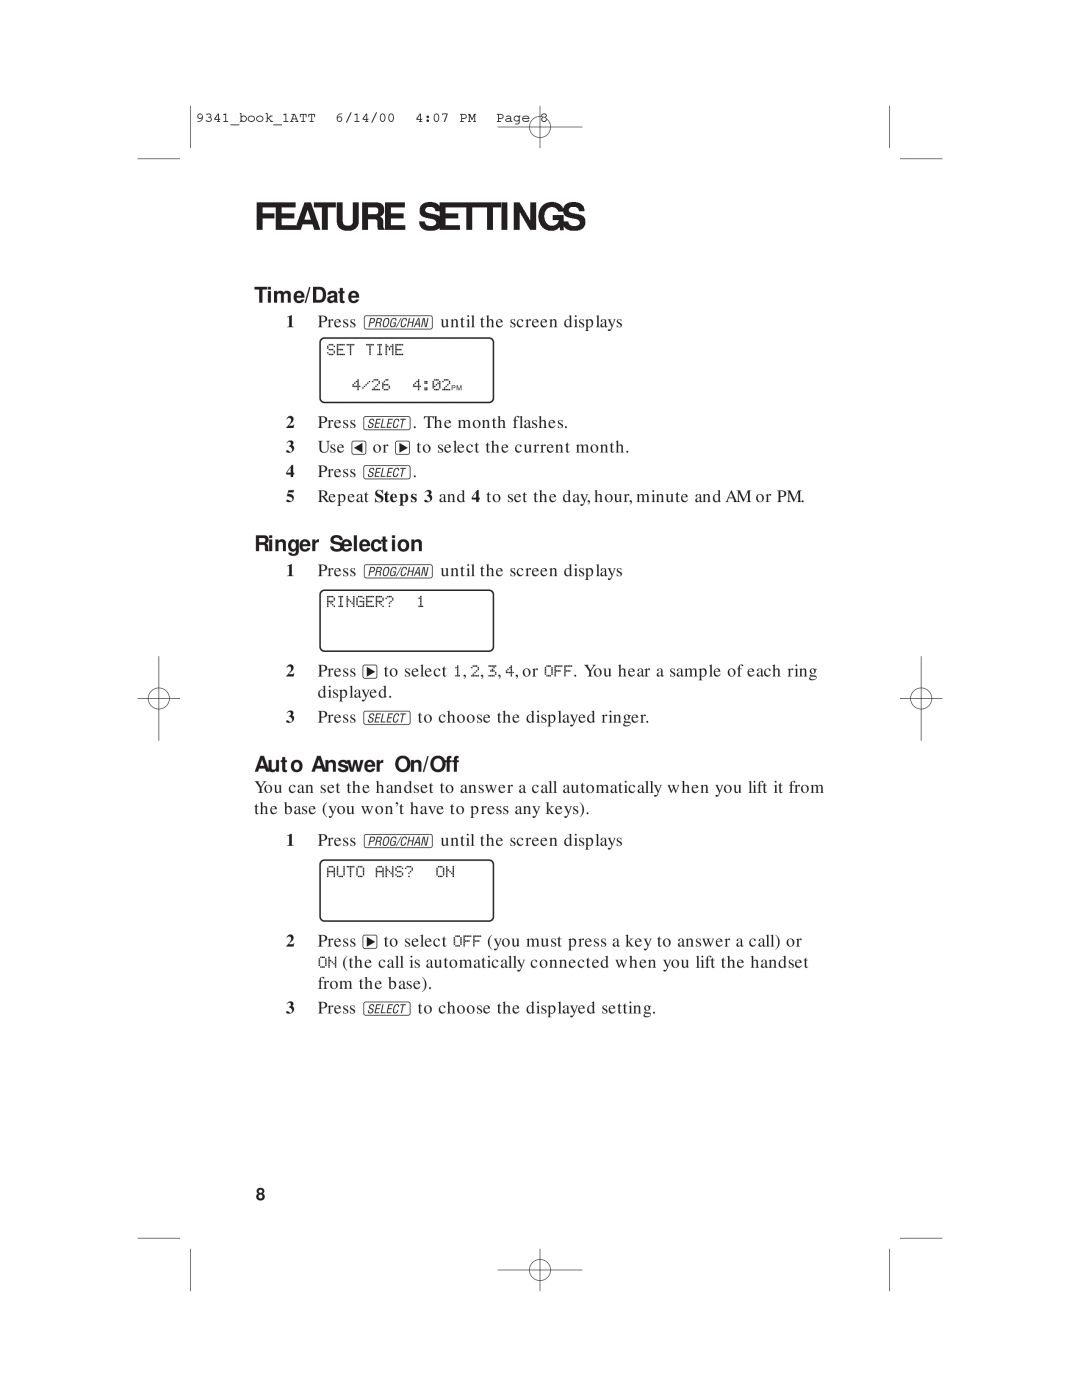 AT&T 9341 user manual Feature Settings, Time/Date, Ringer Selection, Auto Answer On/Off 